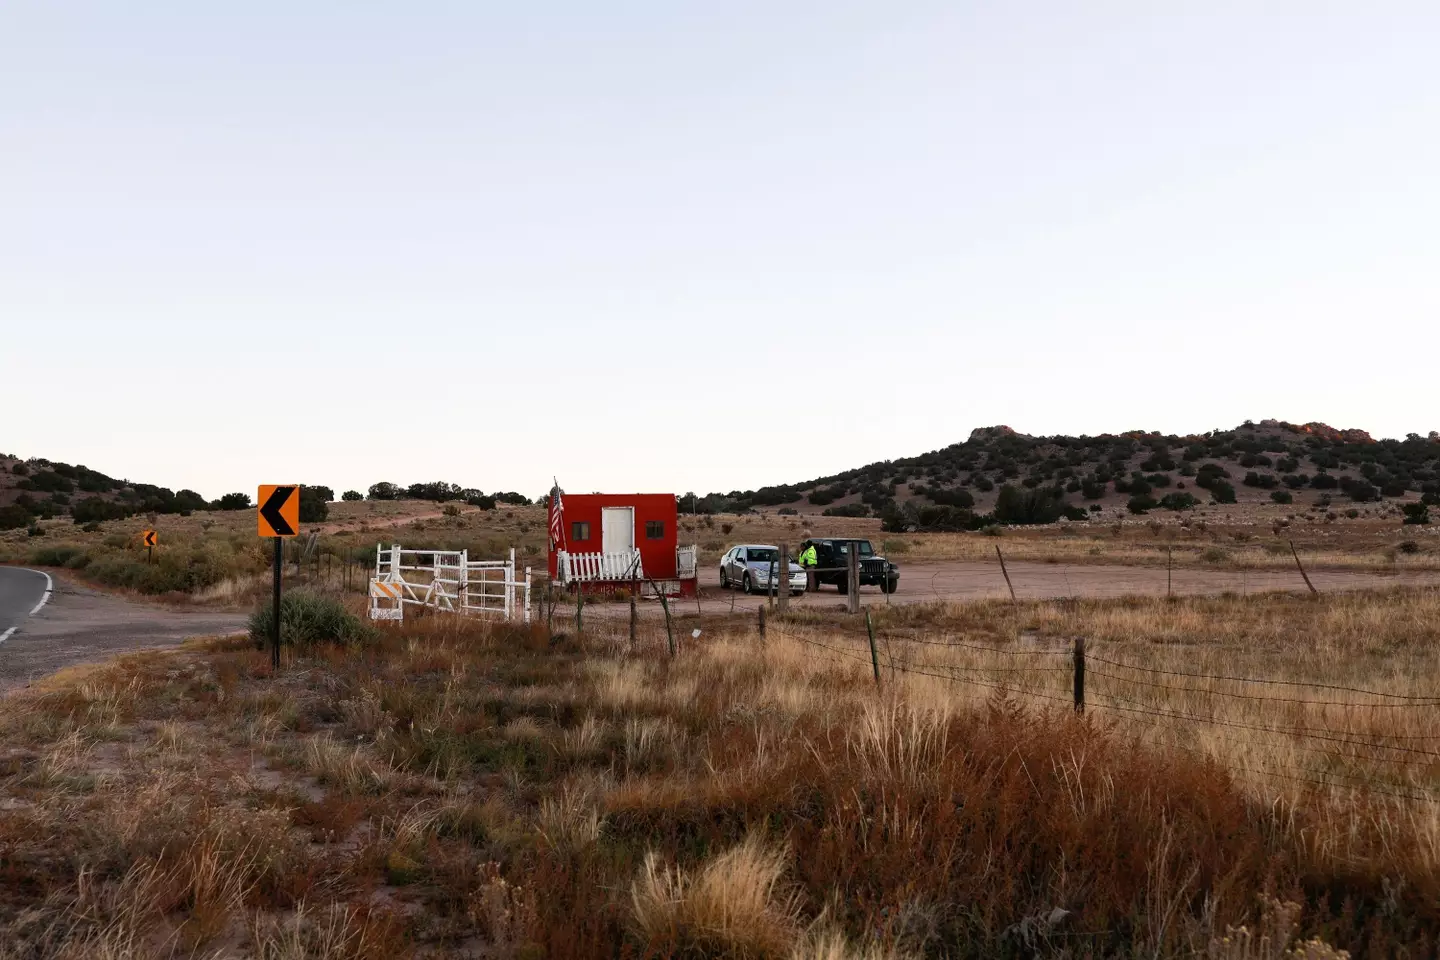 The incident took place on the New Mexico set of Rust.